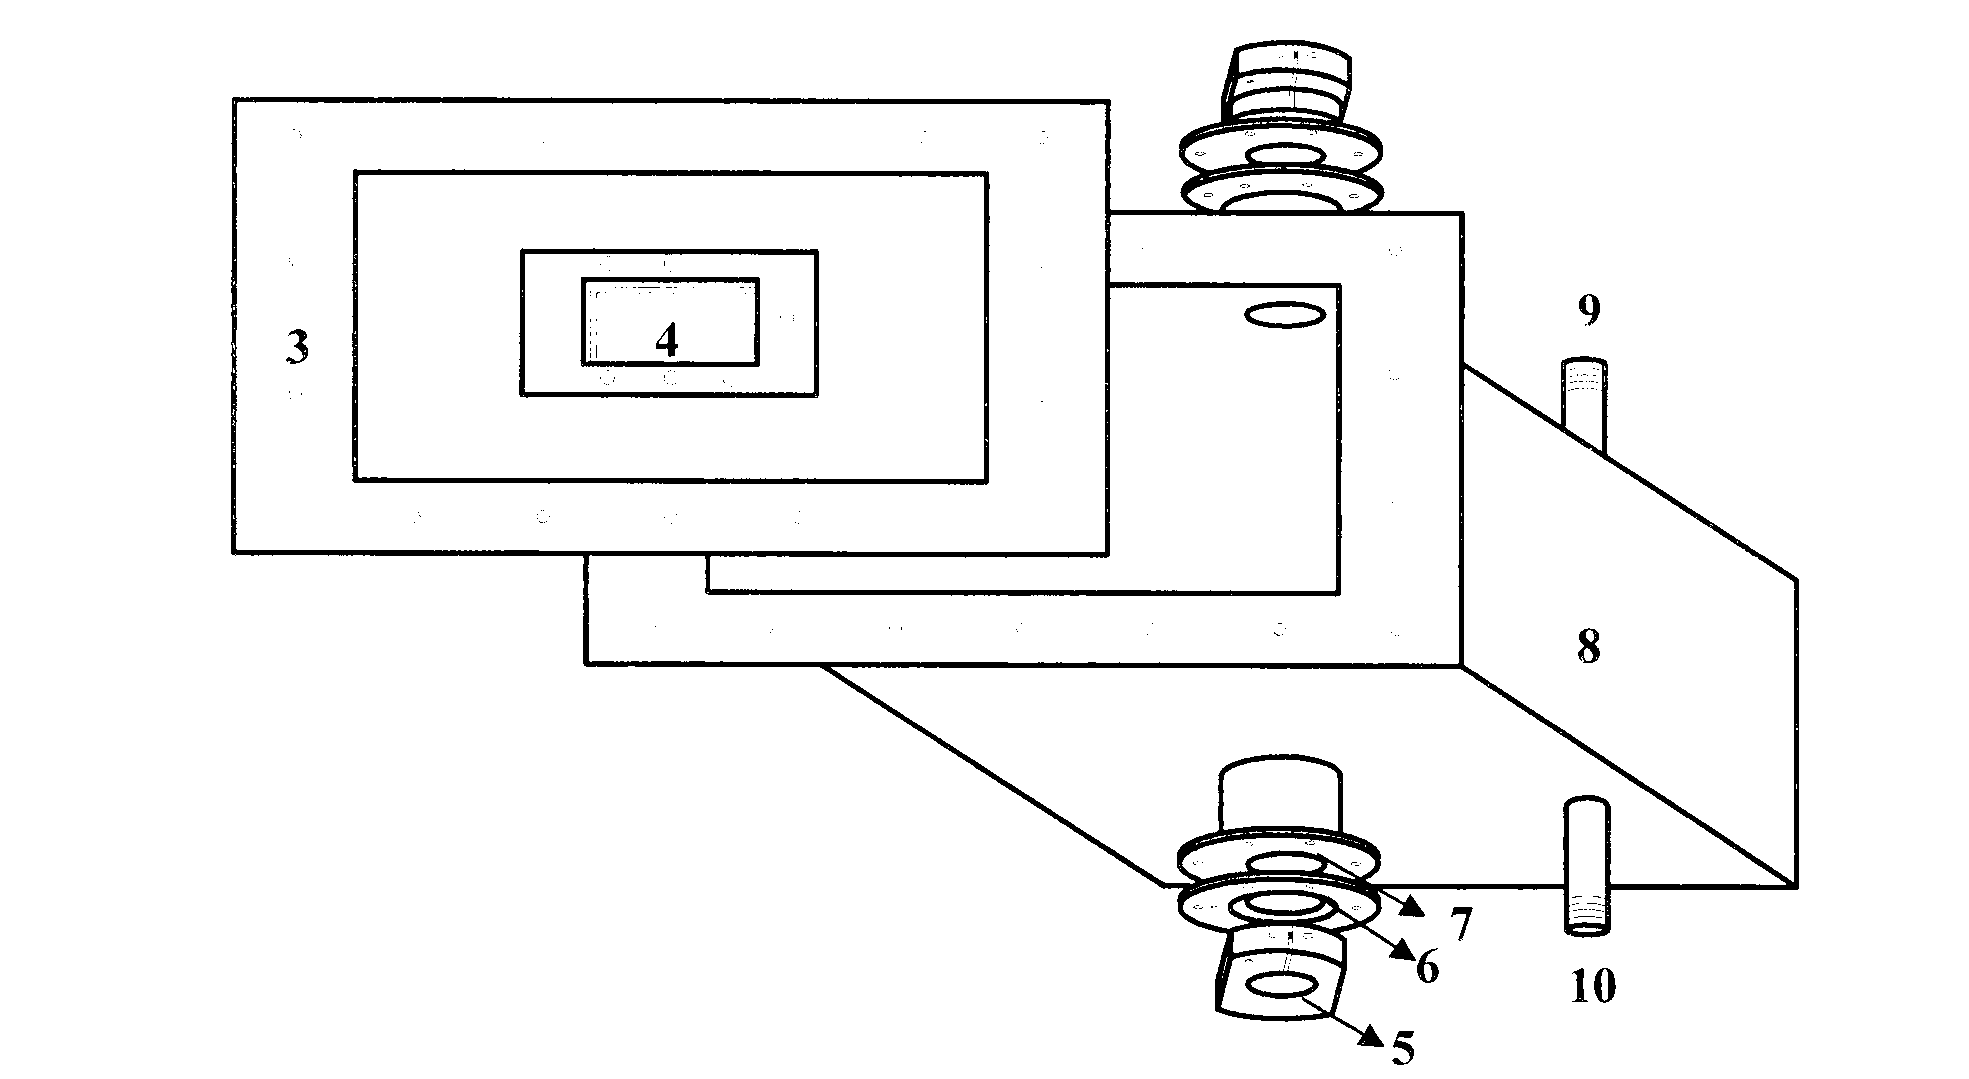 Apparatus and method for microwave enhanced membrane distillation process